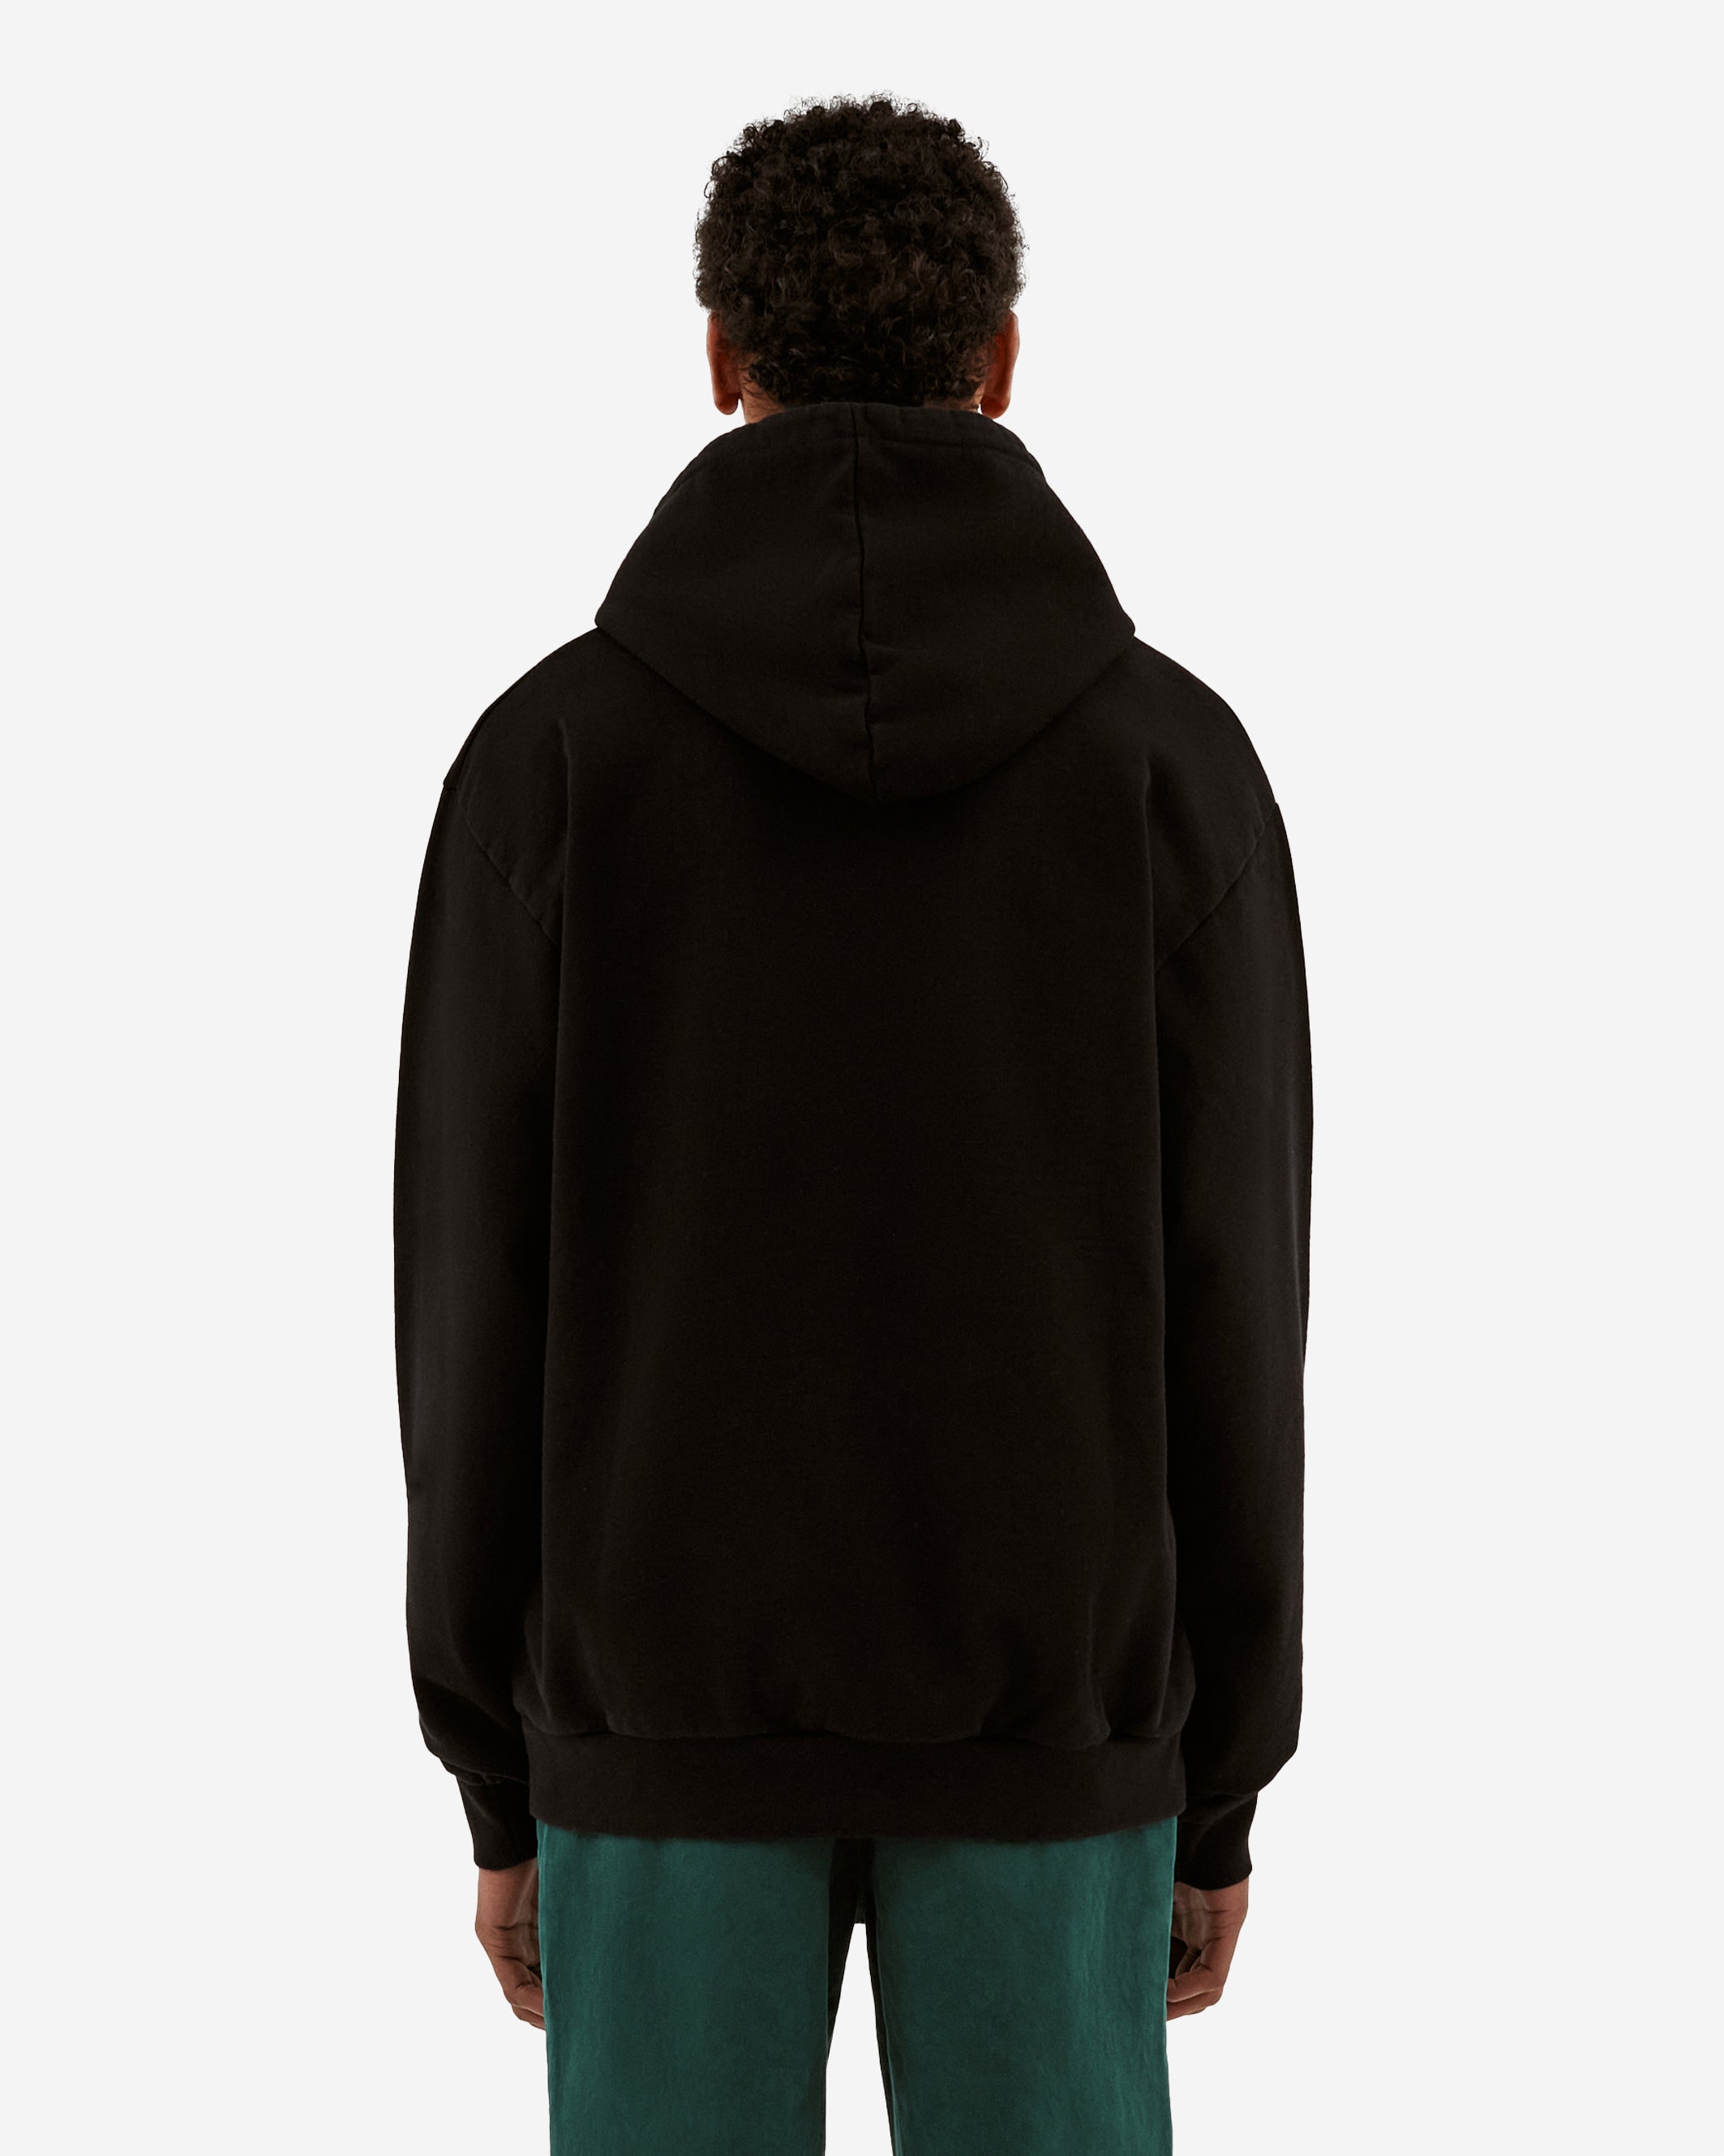 The Harmon Graphic Hoodie is an essential hoodie for this Autumn/Winter collection. The hoodie presents itself with a seasonal graphic print on the front. Made out of premium thick cotton, the hoodie has an adjustable drawstring hood and a kangaroo pocket.